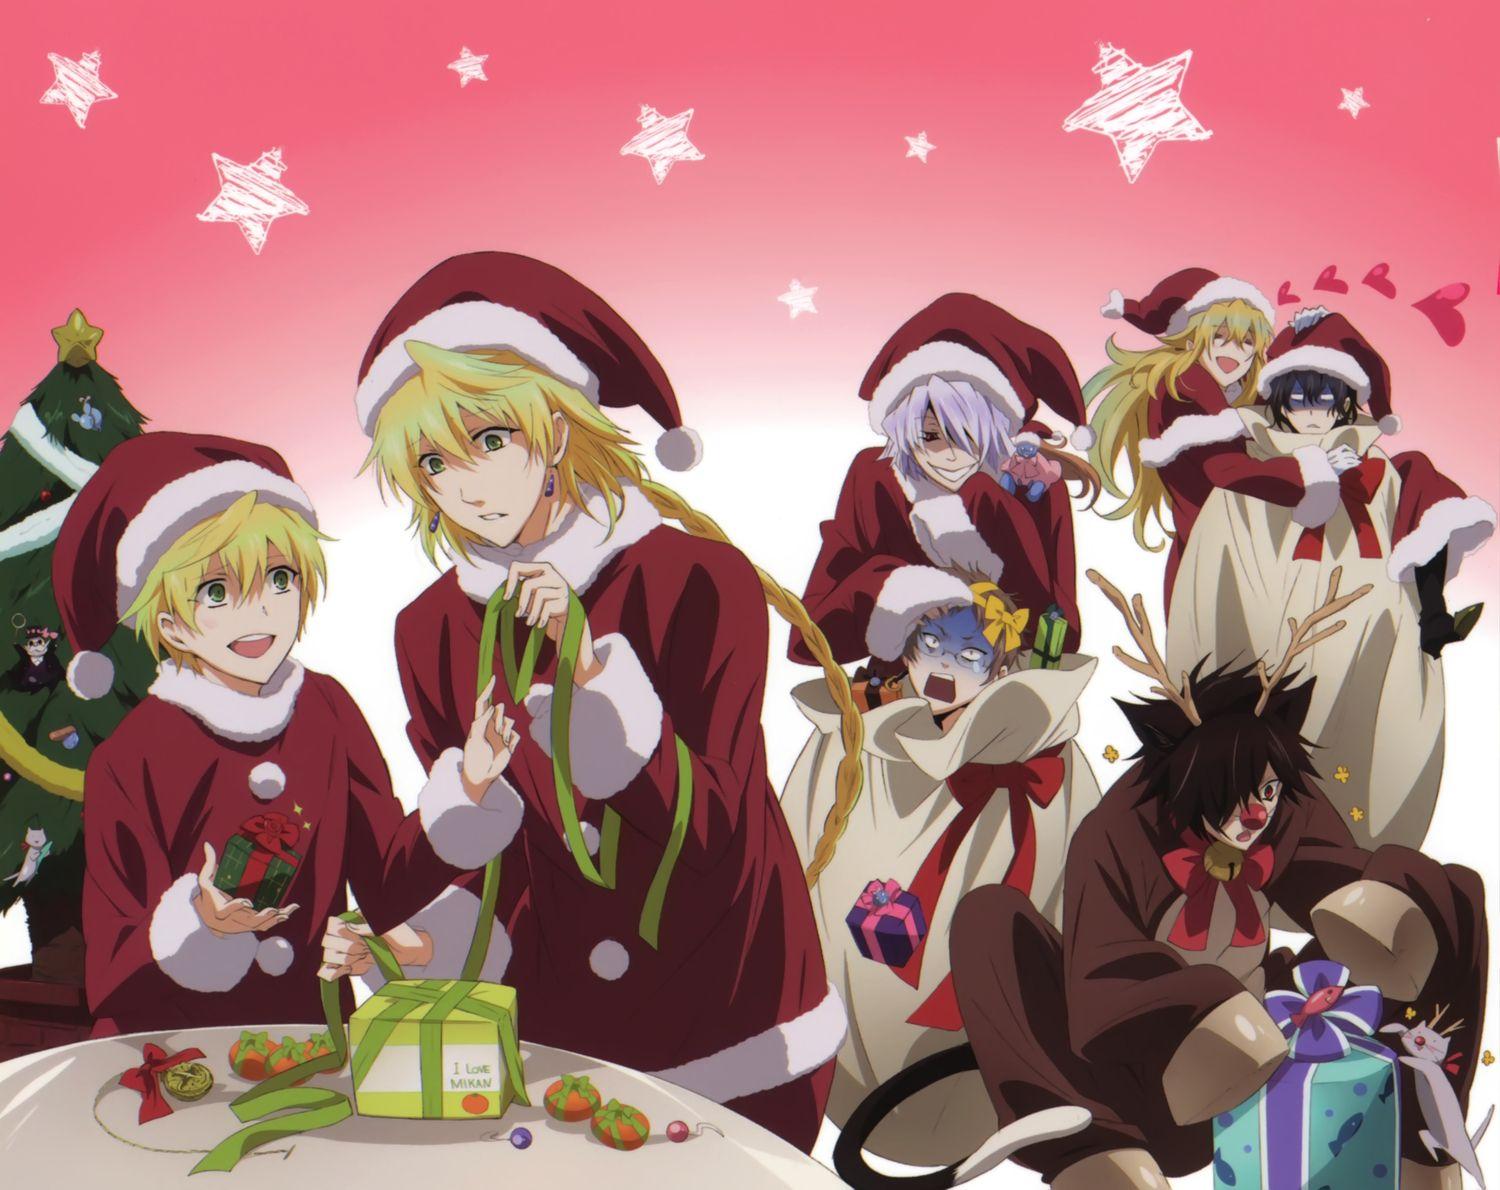 13+ GREAT Christmas Anime To Watch During Festive Season